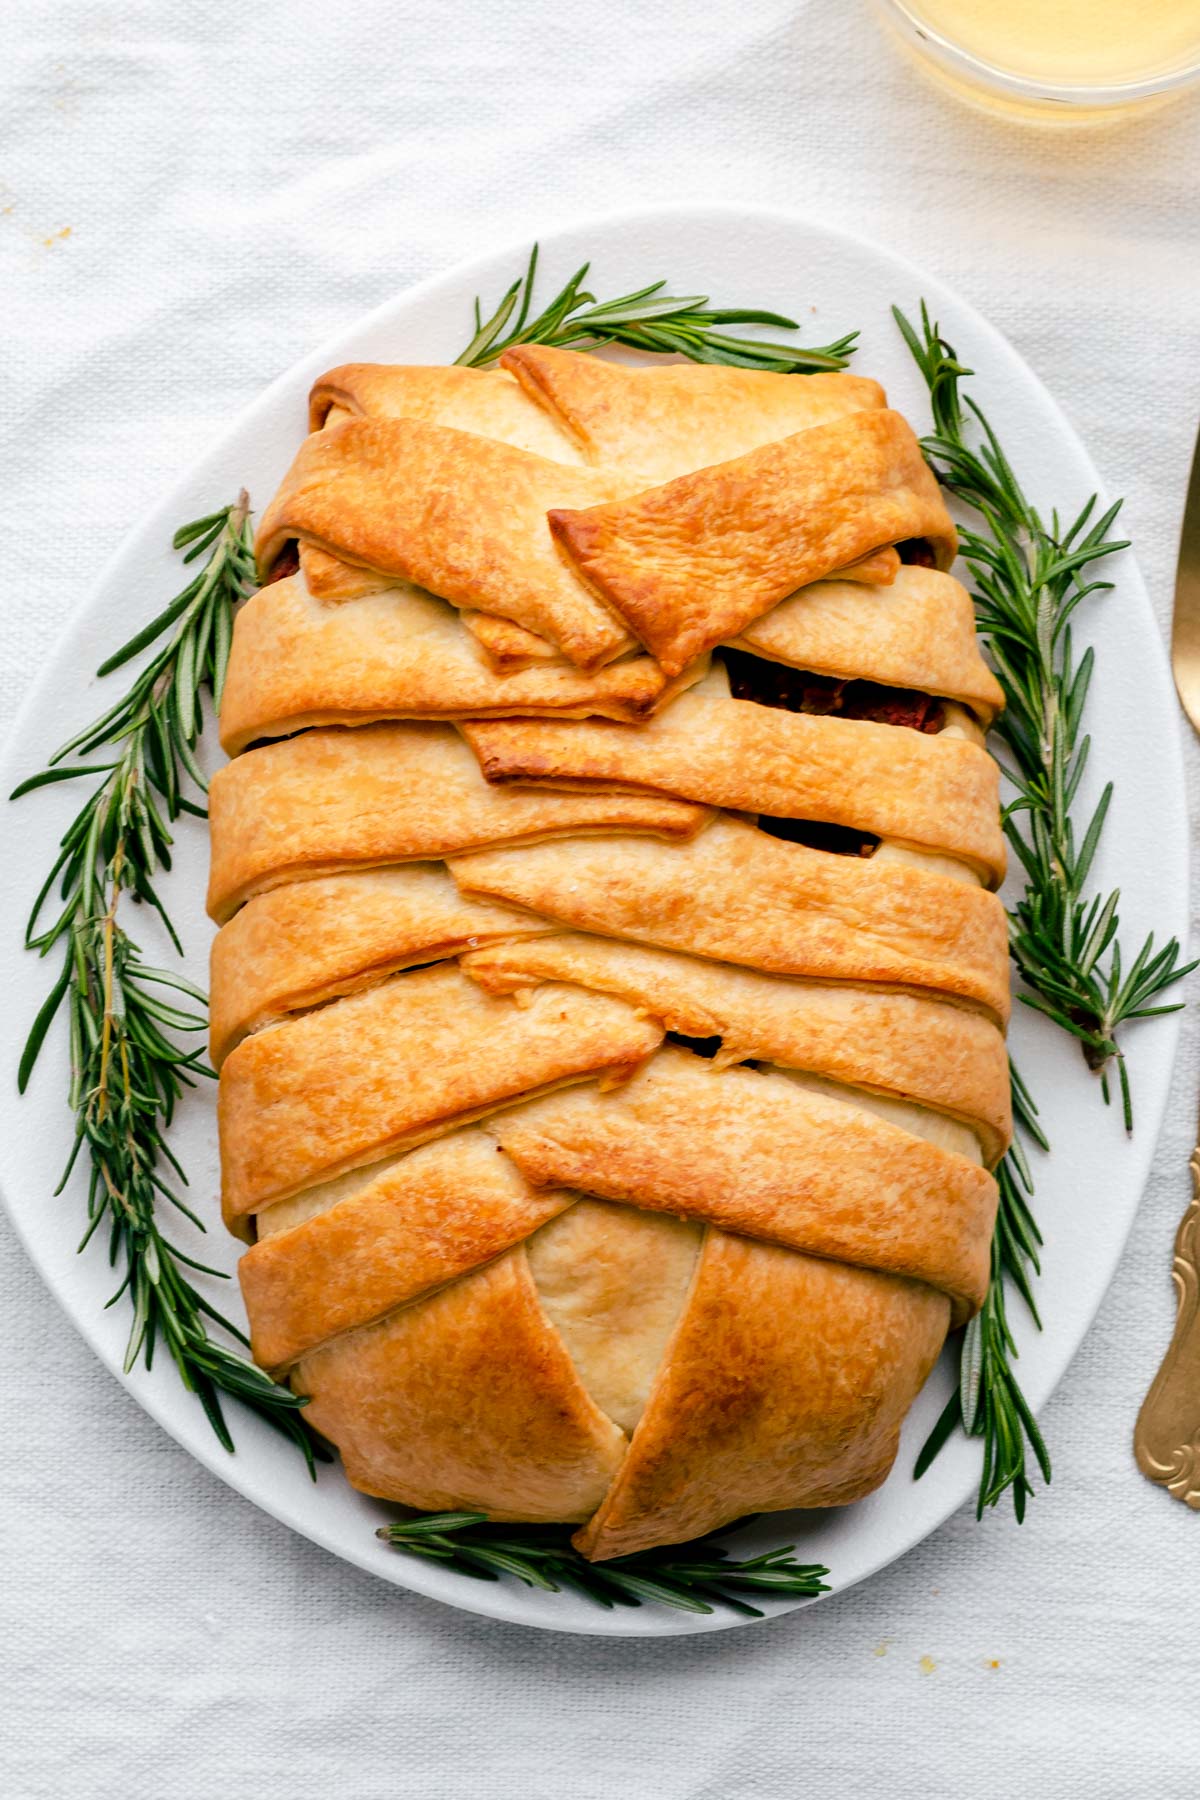 baked vegan wellington on a white plate with rosemary